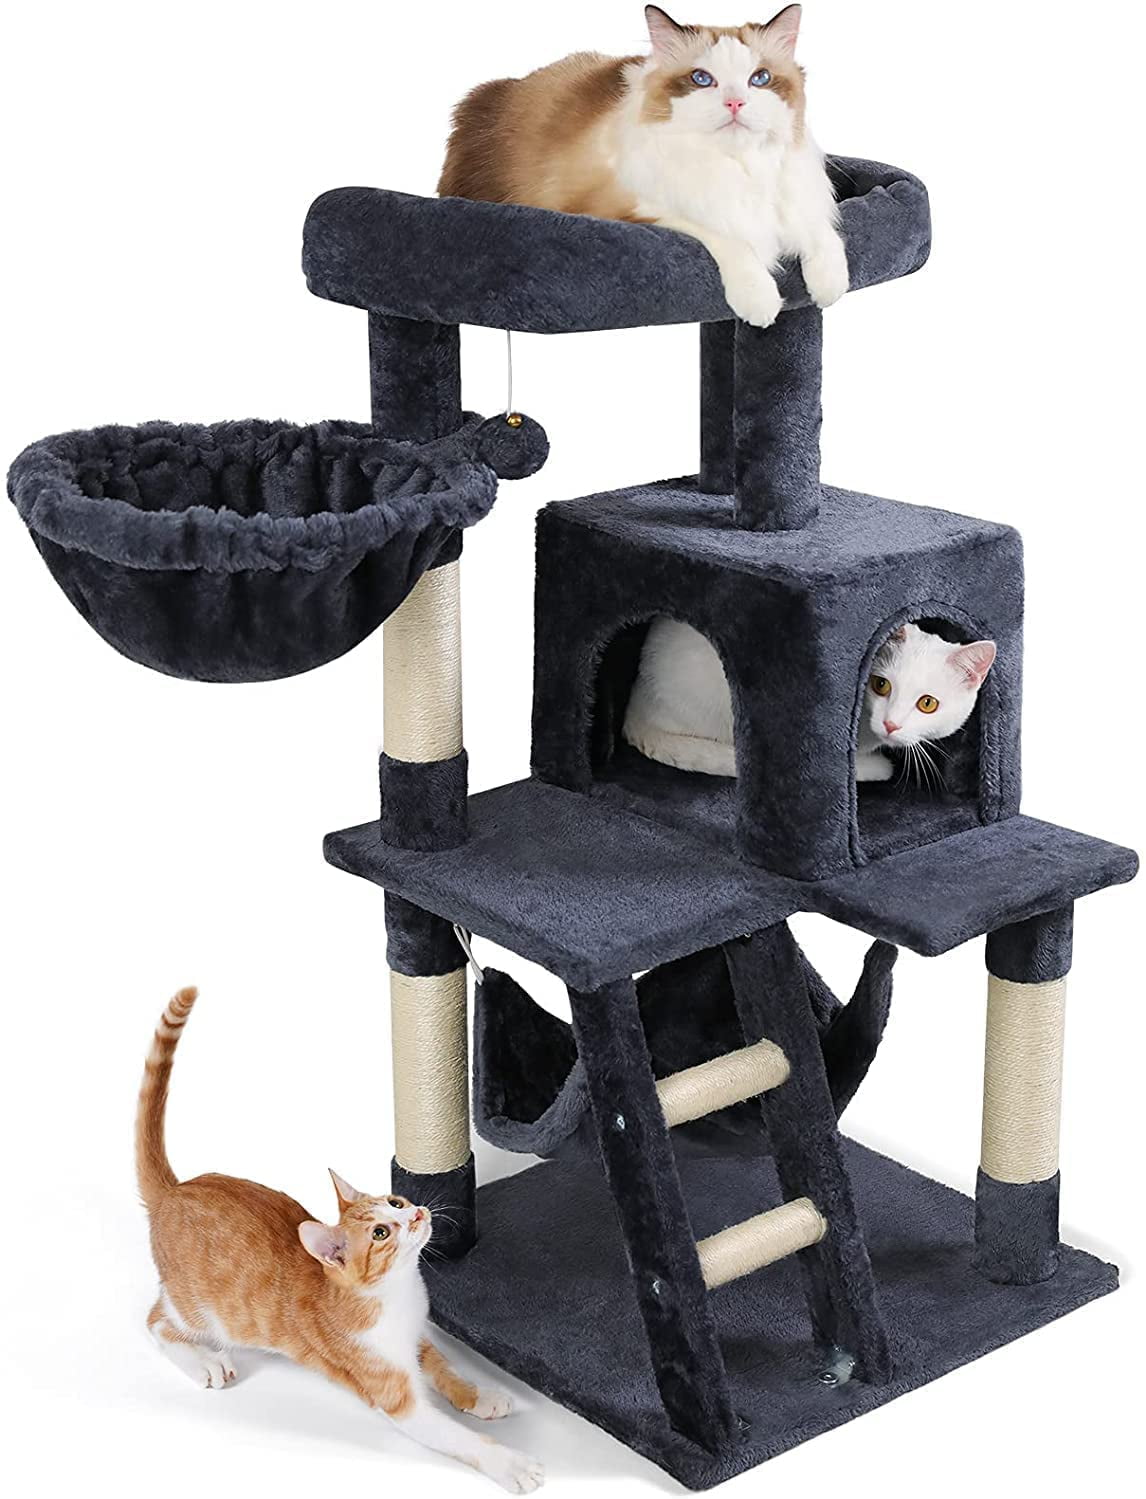 Cat Scratching Posts for Adult Cats Scratching Posts for Indoor Cats for Entertainment Cat Activity Center Grey Colour Cat Scratch Poles Cat Climbing Tower to Stop Cats Scratching Furniture